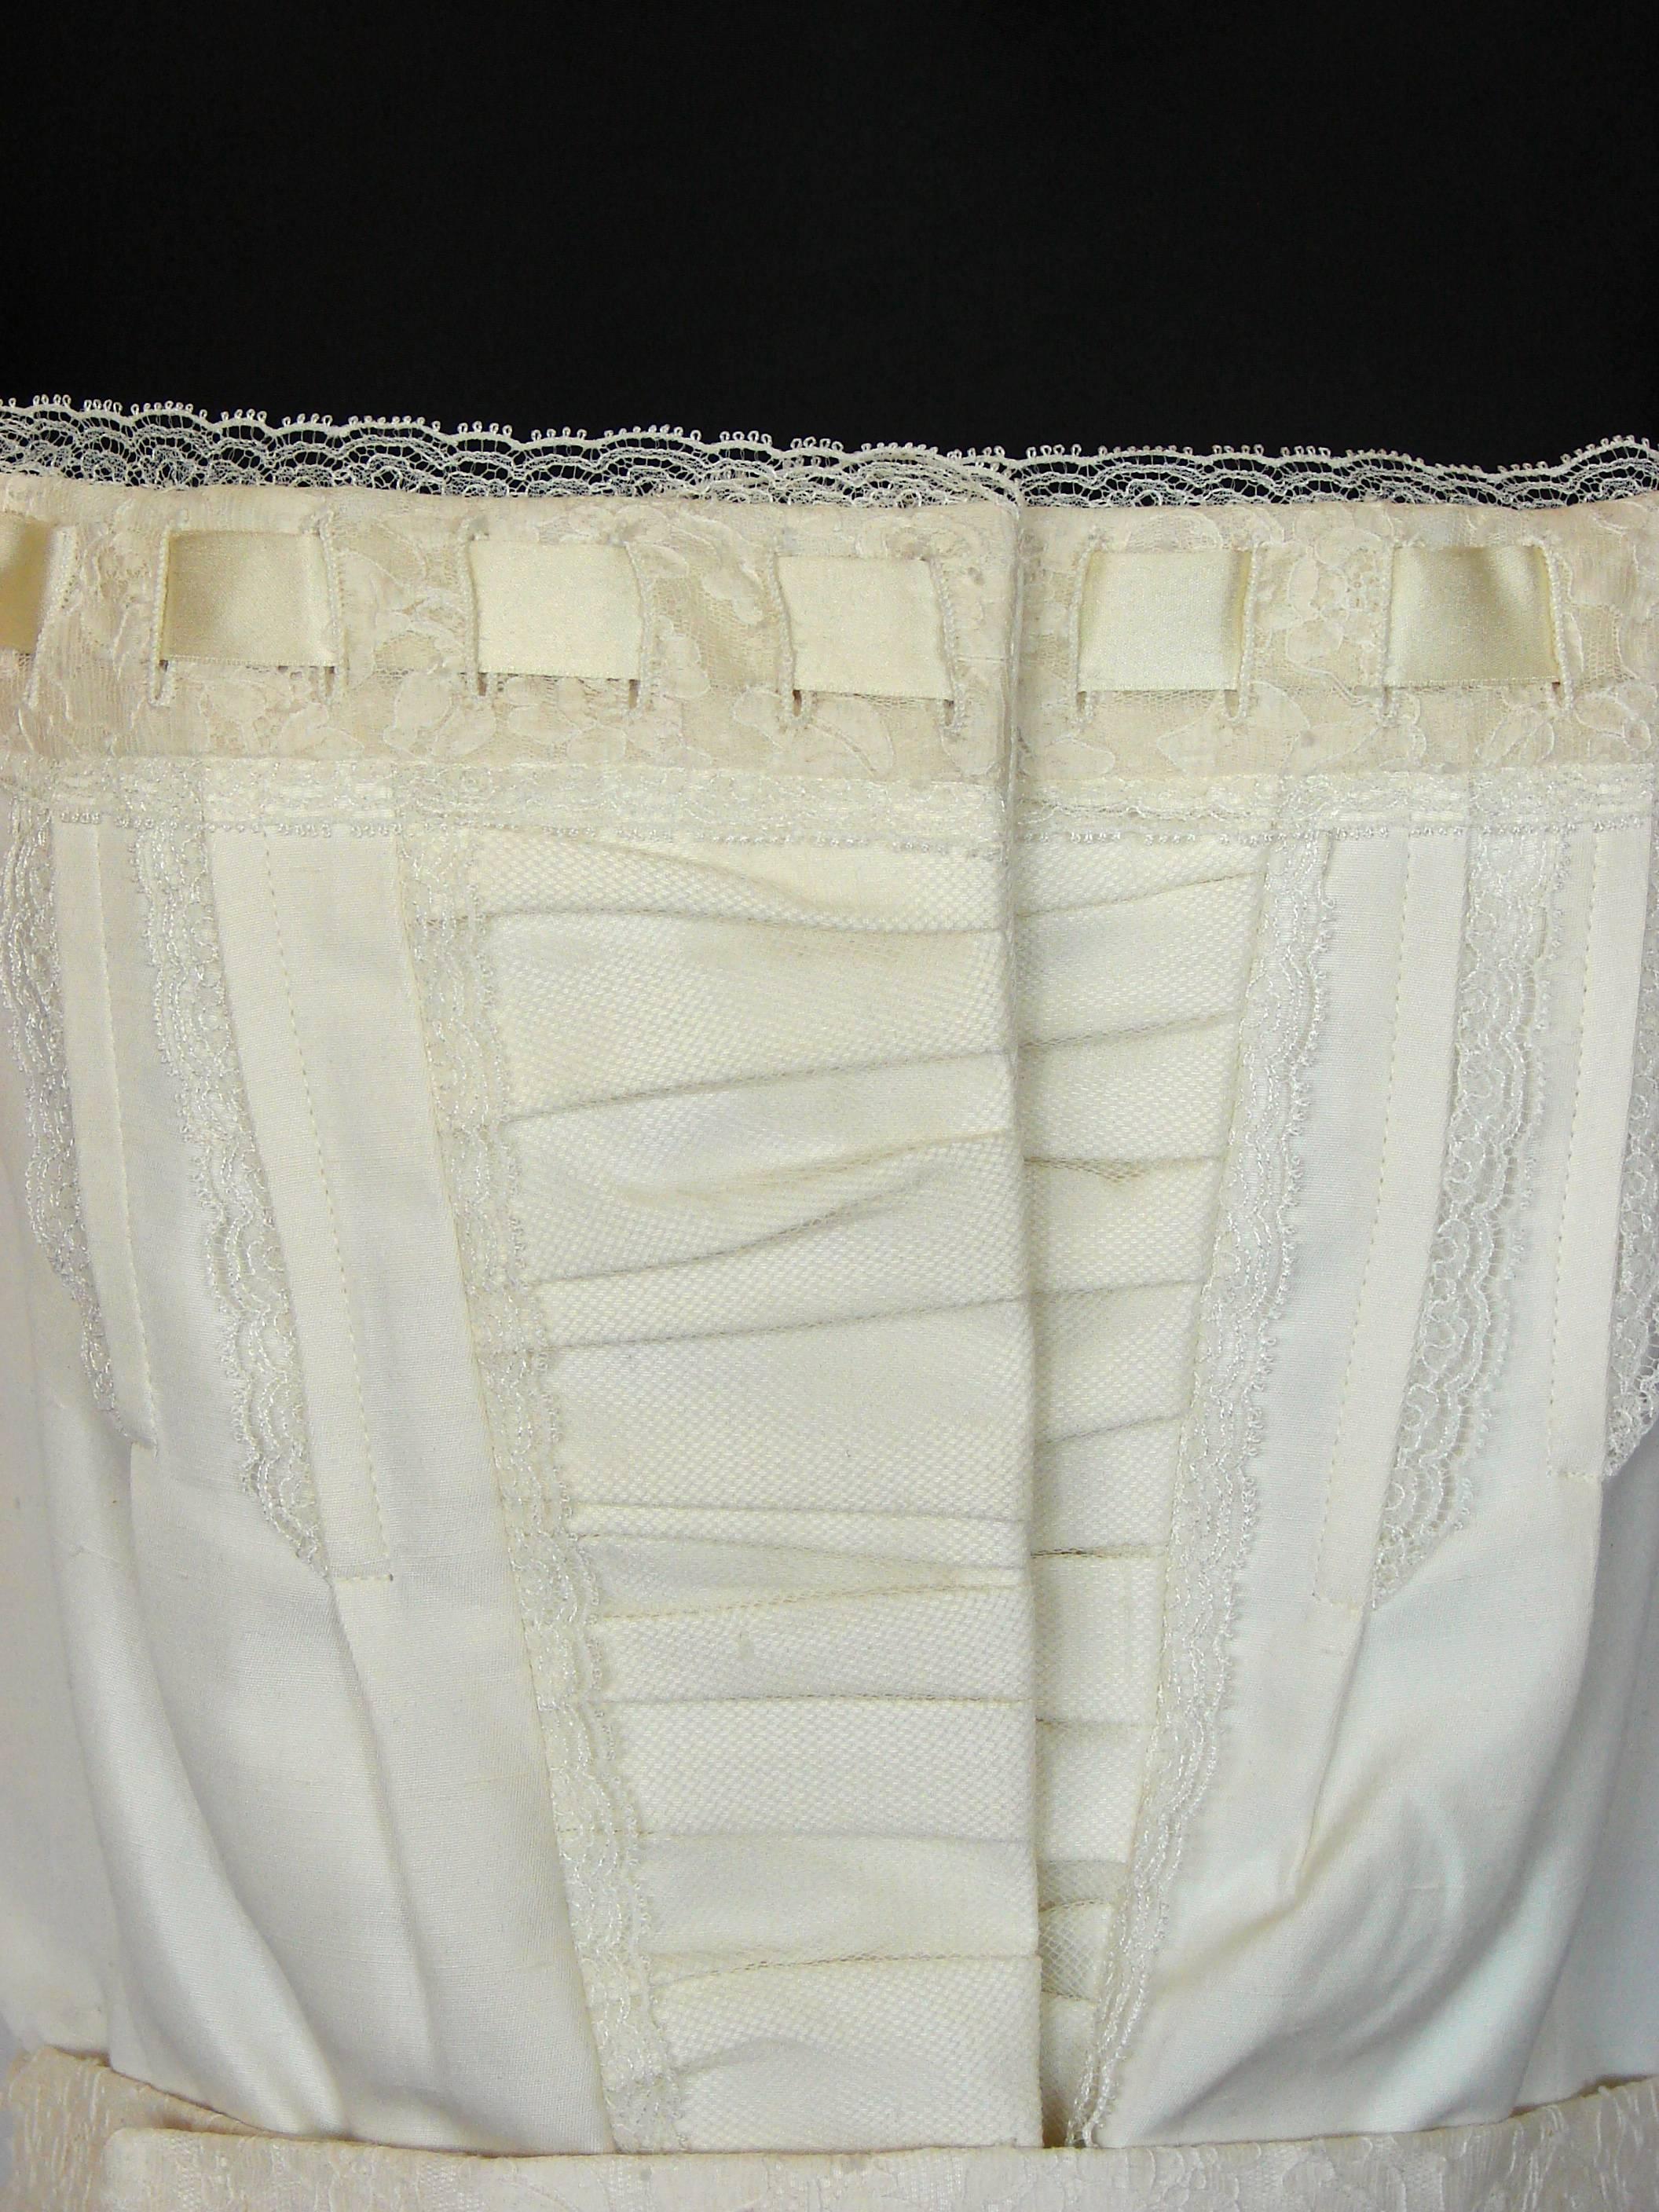 This lovely white corset top was made by Christian Dior in the early 2000s.  Made from what we believe is cotton fabric (no content tag), it's trimmed in silk satin and lace on the bodice.  Fully-lined, this piece has boning at the sides and fastens